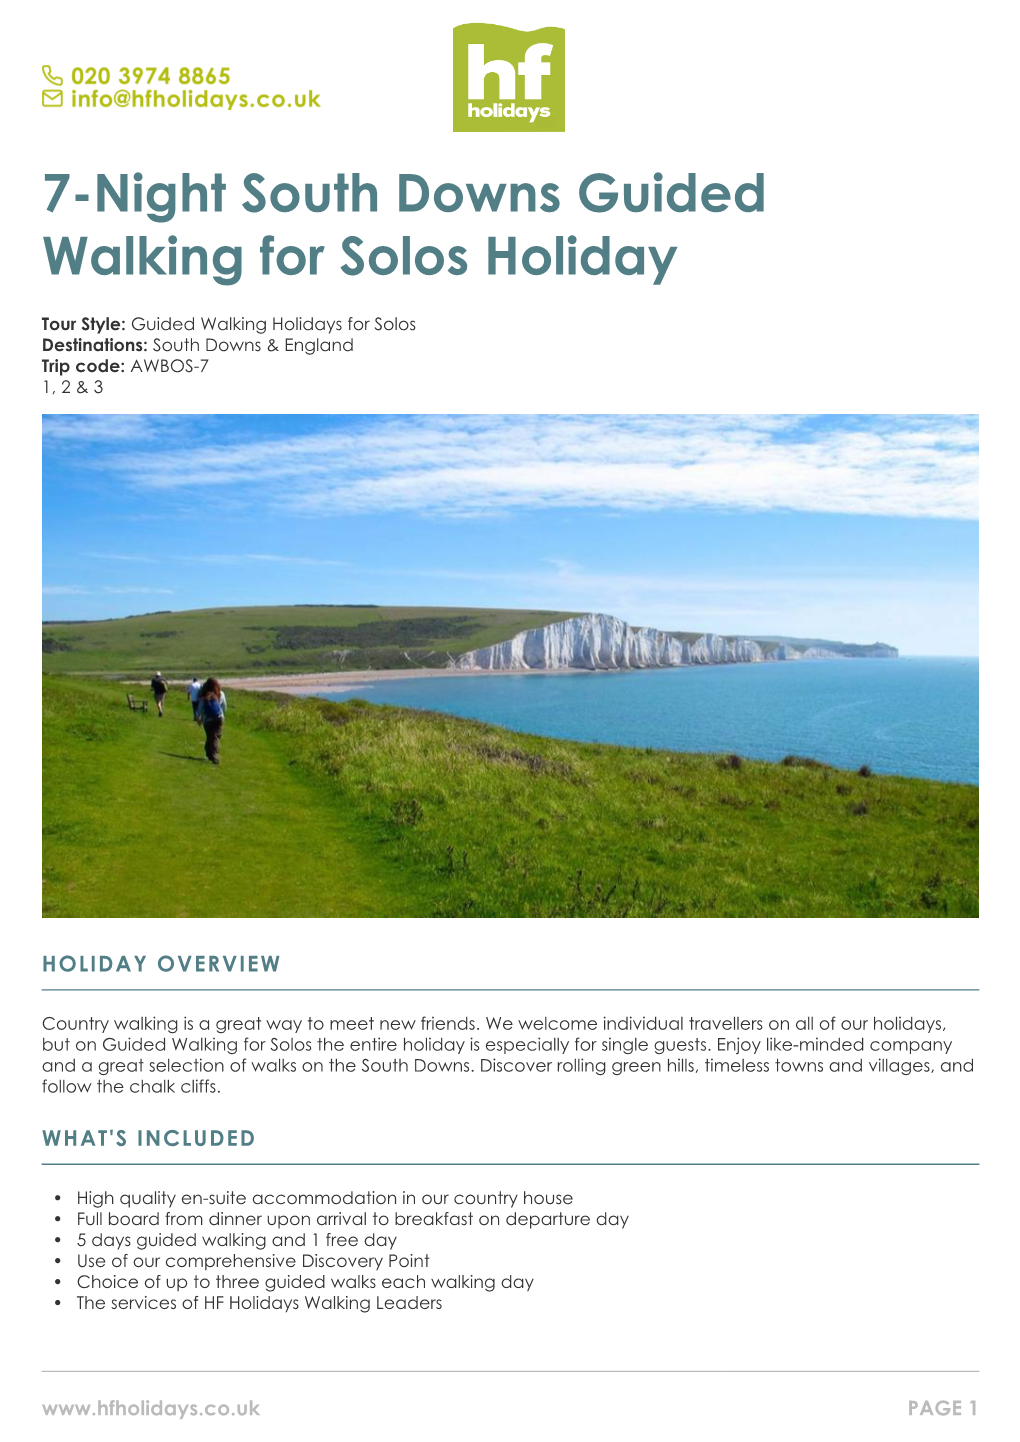 7-Night South Downs Guided Walking for Solos Holiday